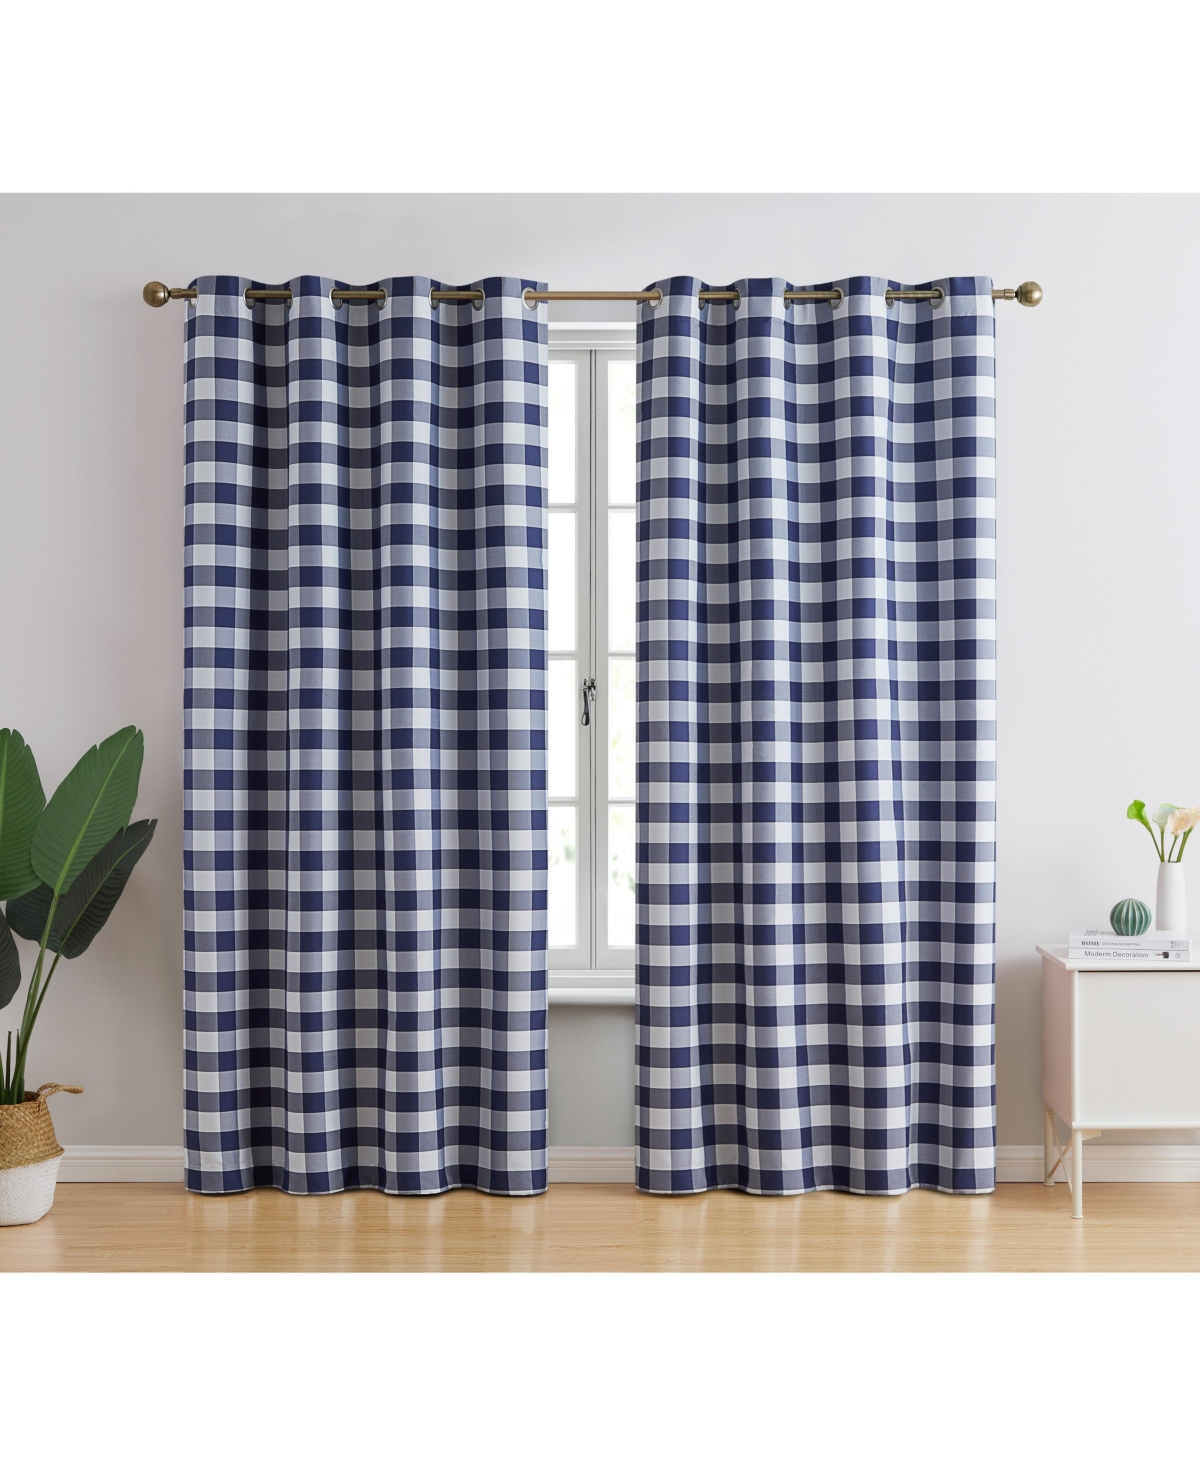 Andersen Buffalo Check Plaid 100% Blackout Thermal Insulated Energy Savings Heat/Cold Blocking Grommet Curtain Drapery Panels for Bedroom & Liv